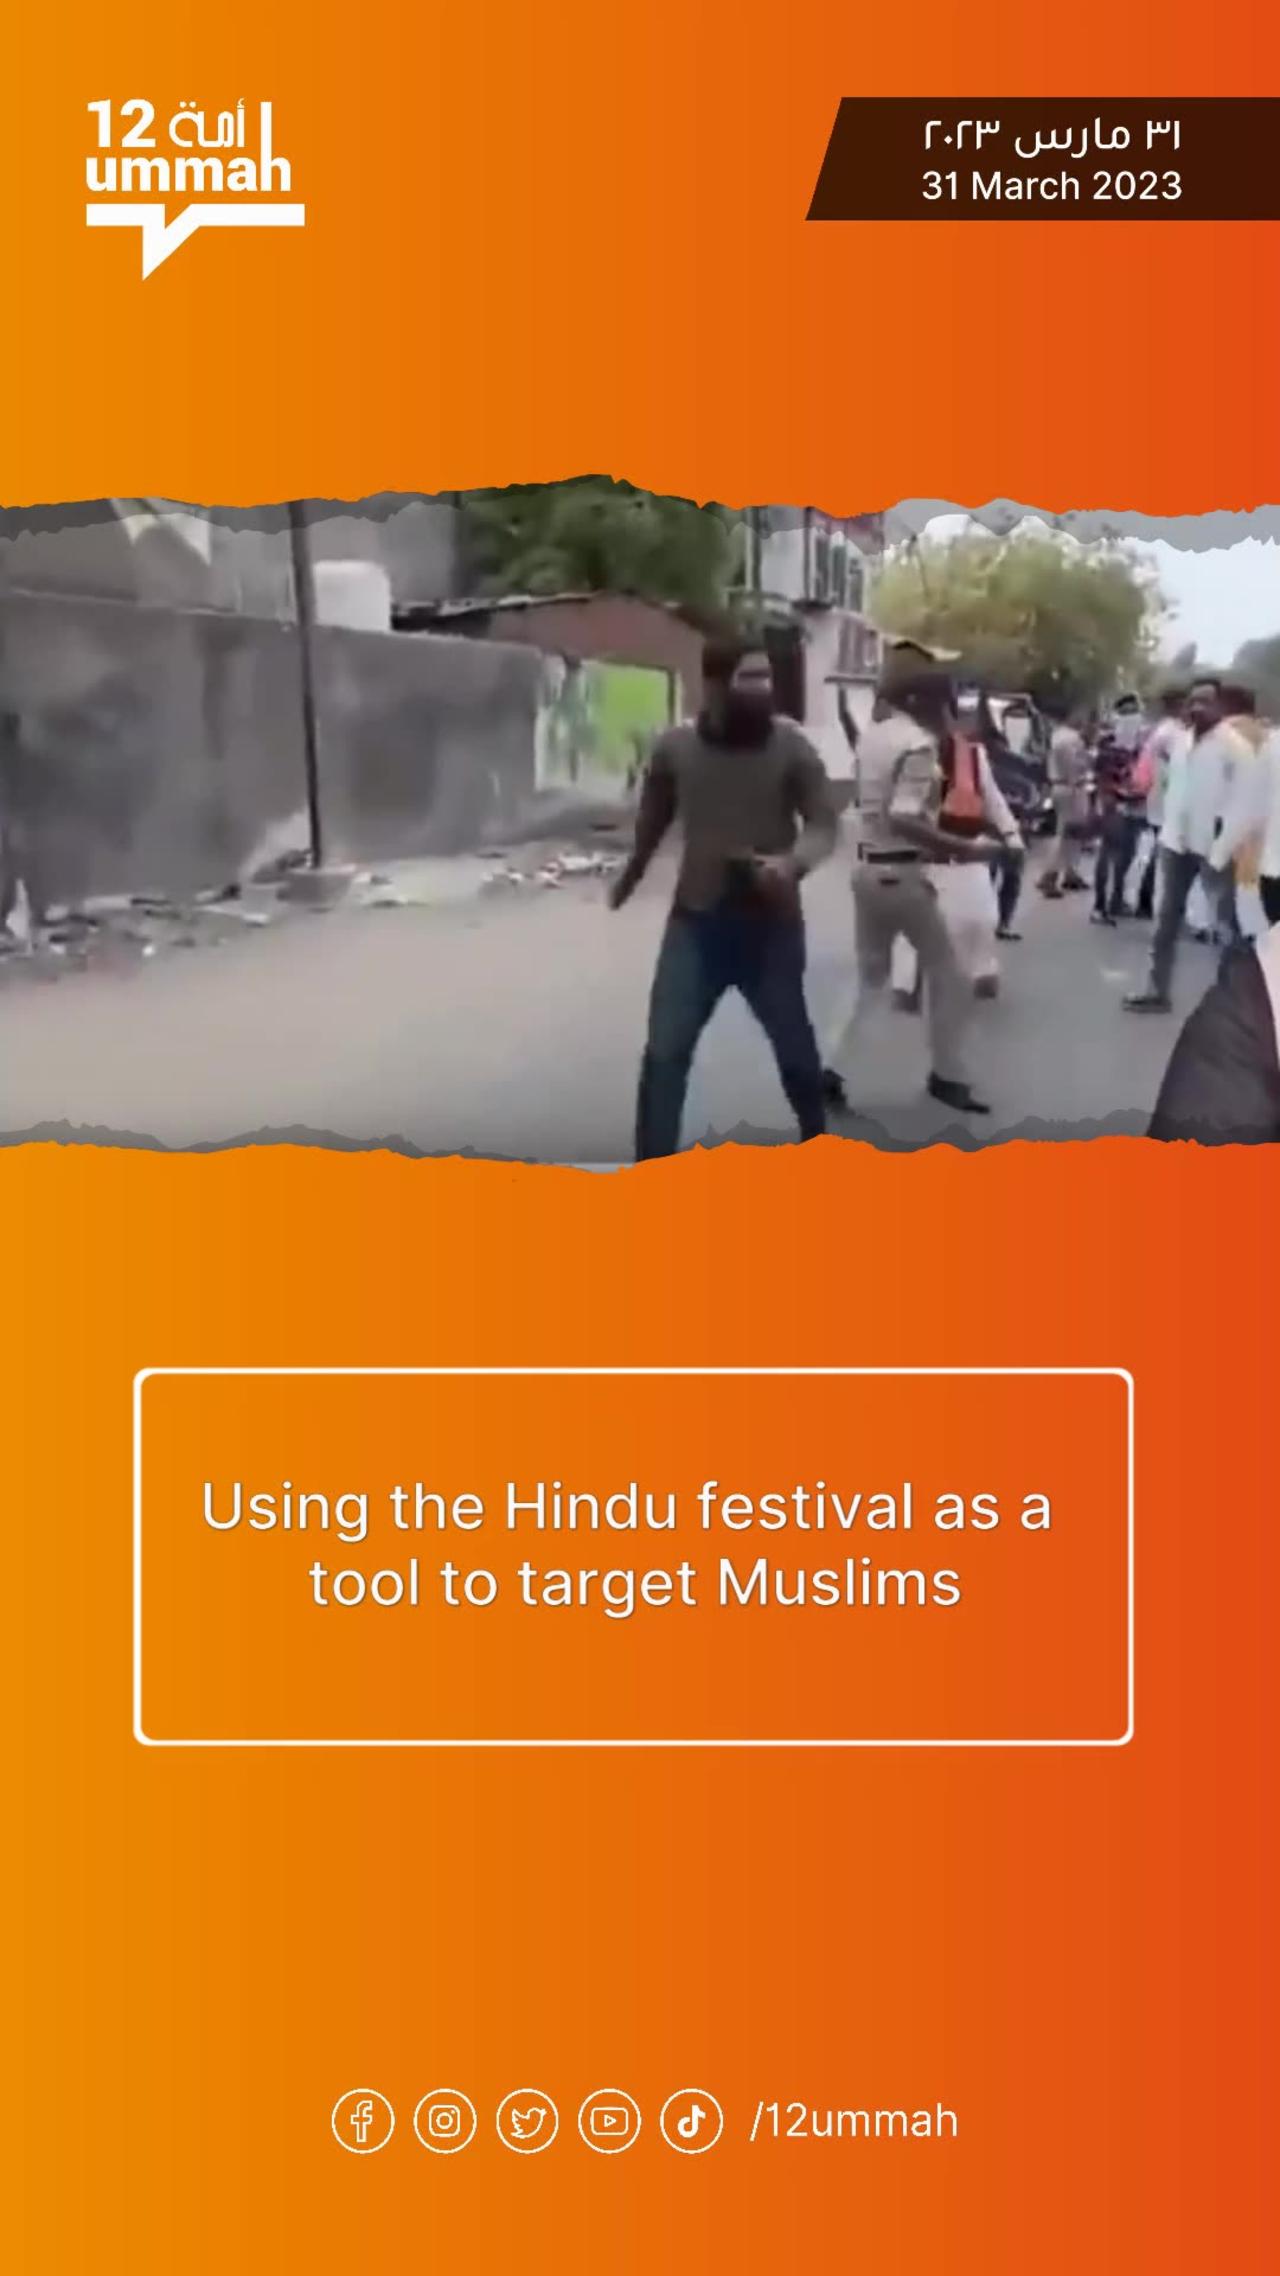 Using the Hindu festival as a tool to target Muslims